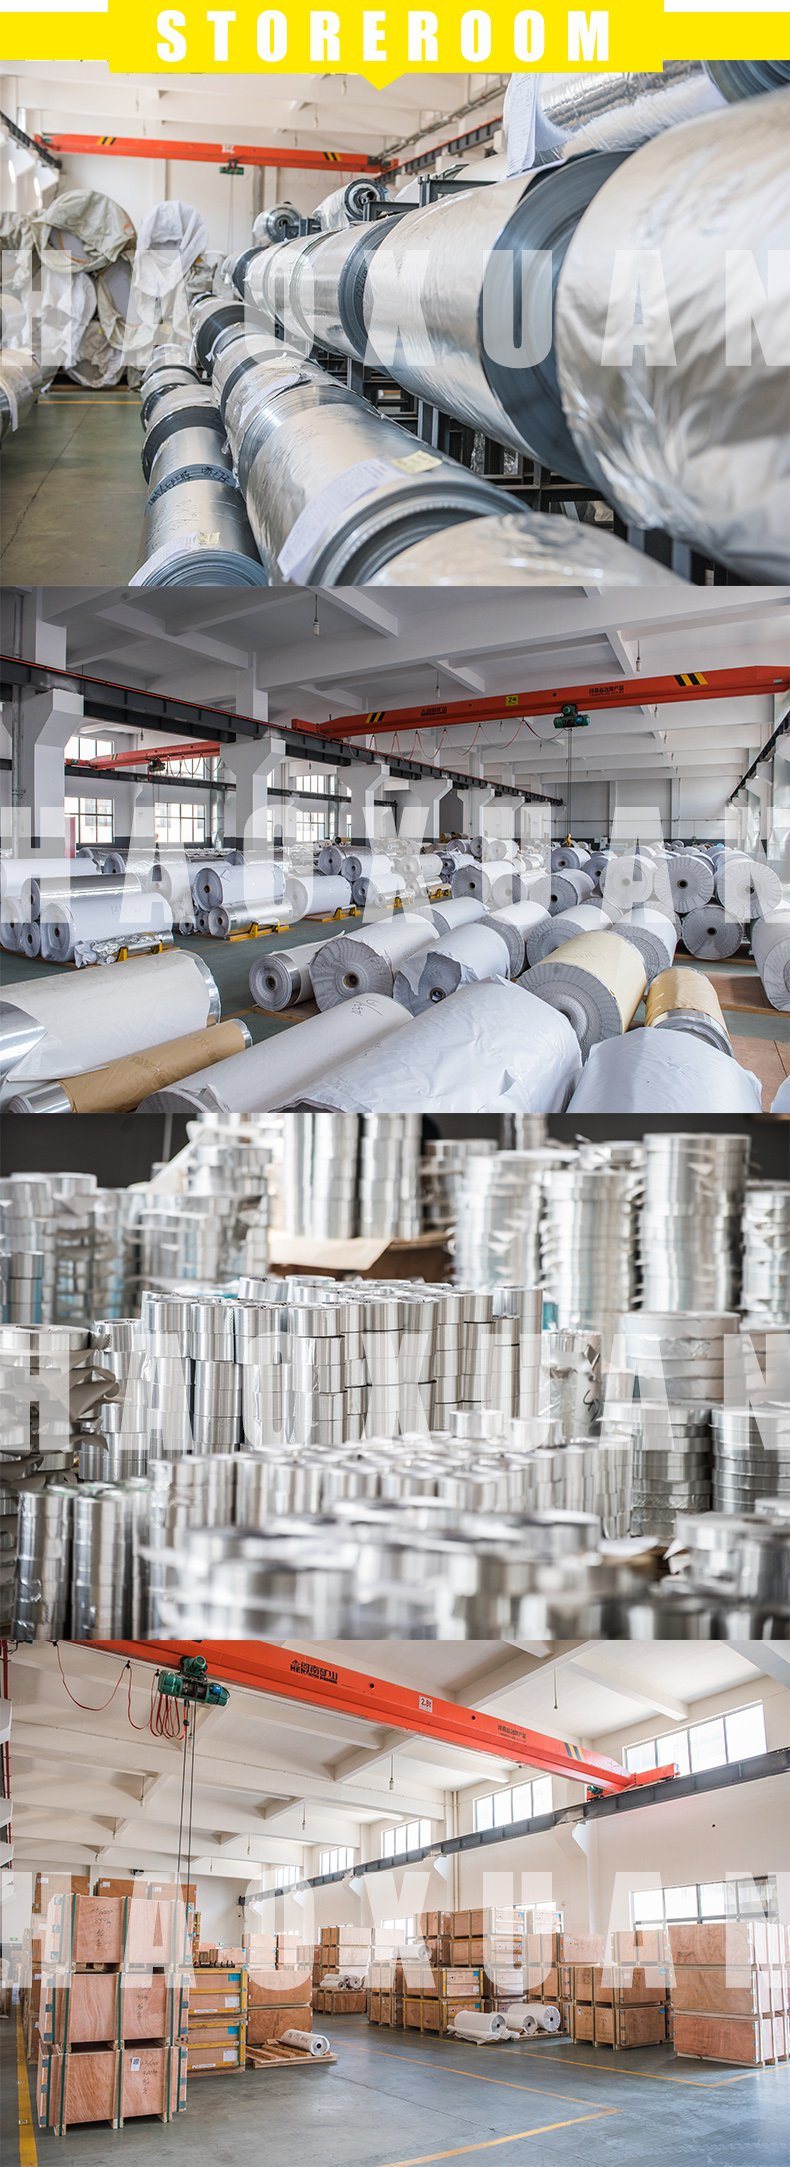 Strong Adhesion Heat Insulation Packing Aluminum Foil Tape in Vessel Engine Room